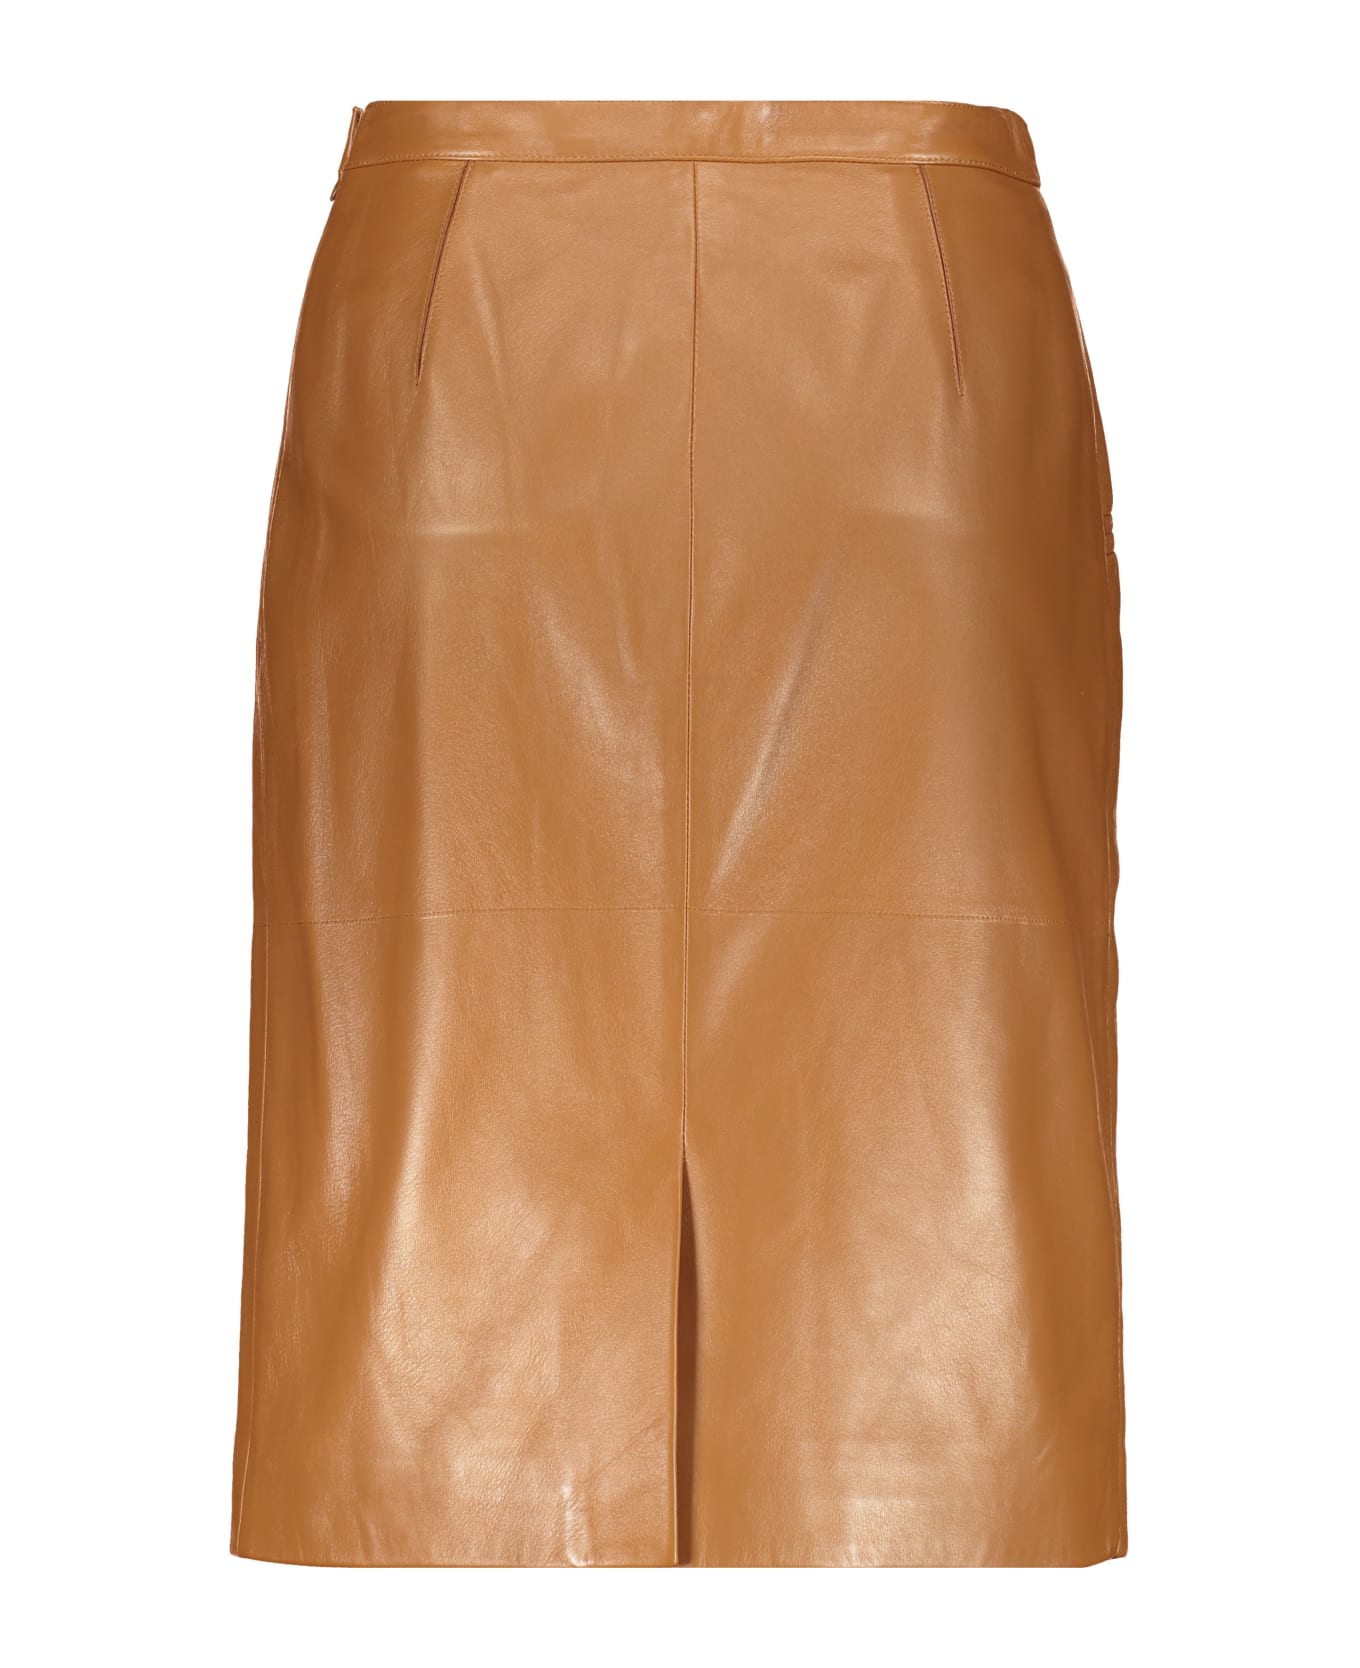 Burberry Leather Skirt - brown スカート